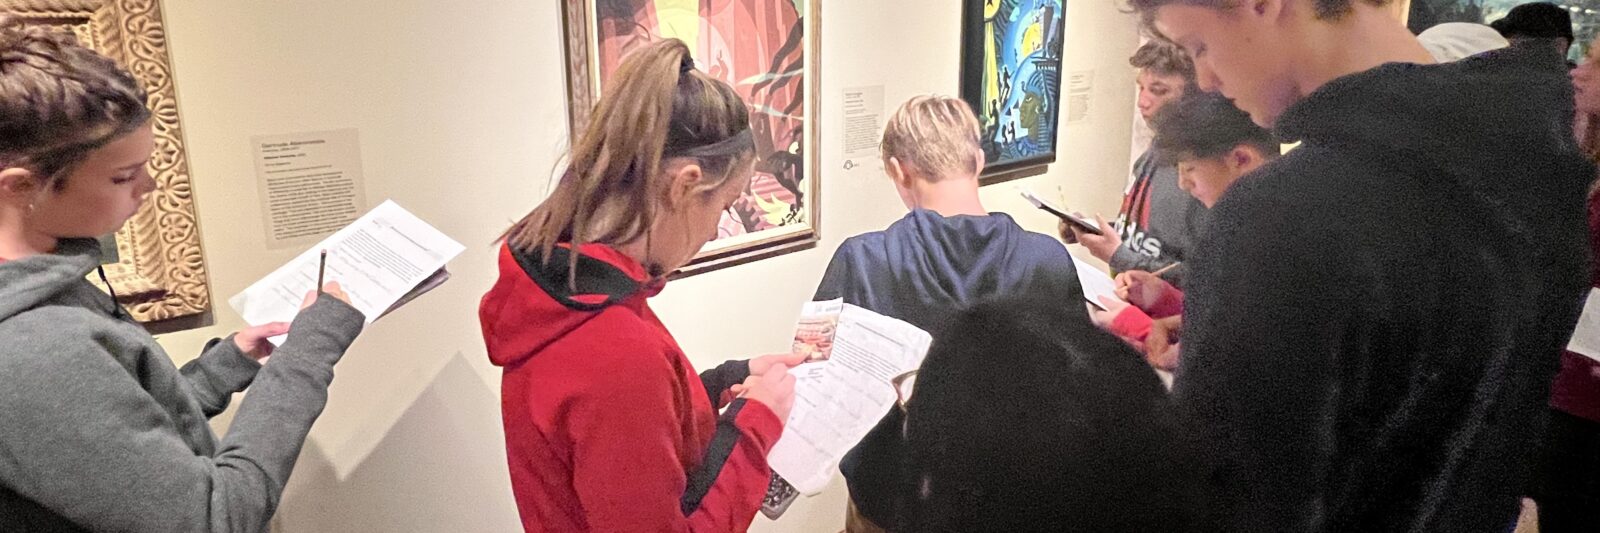 Students view Aaron Douglas paintings at the Milwaukee Art Museum.